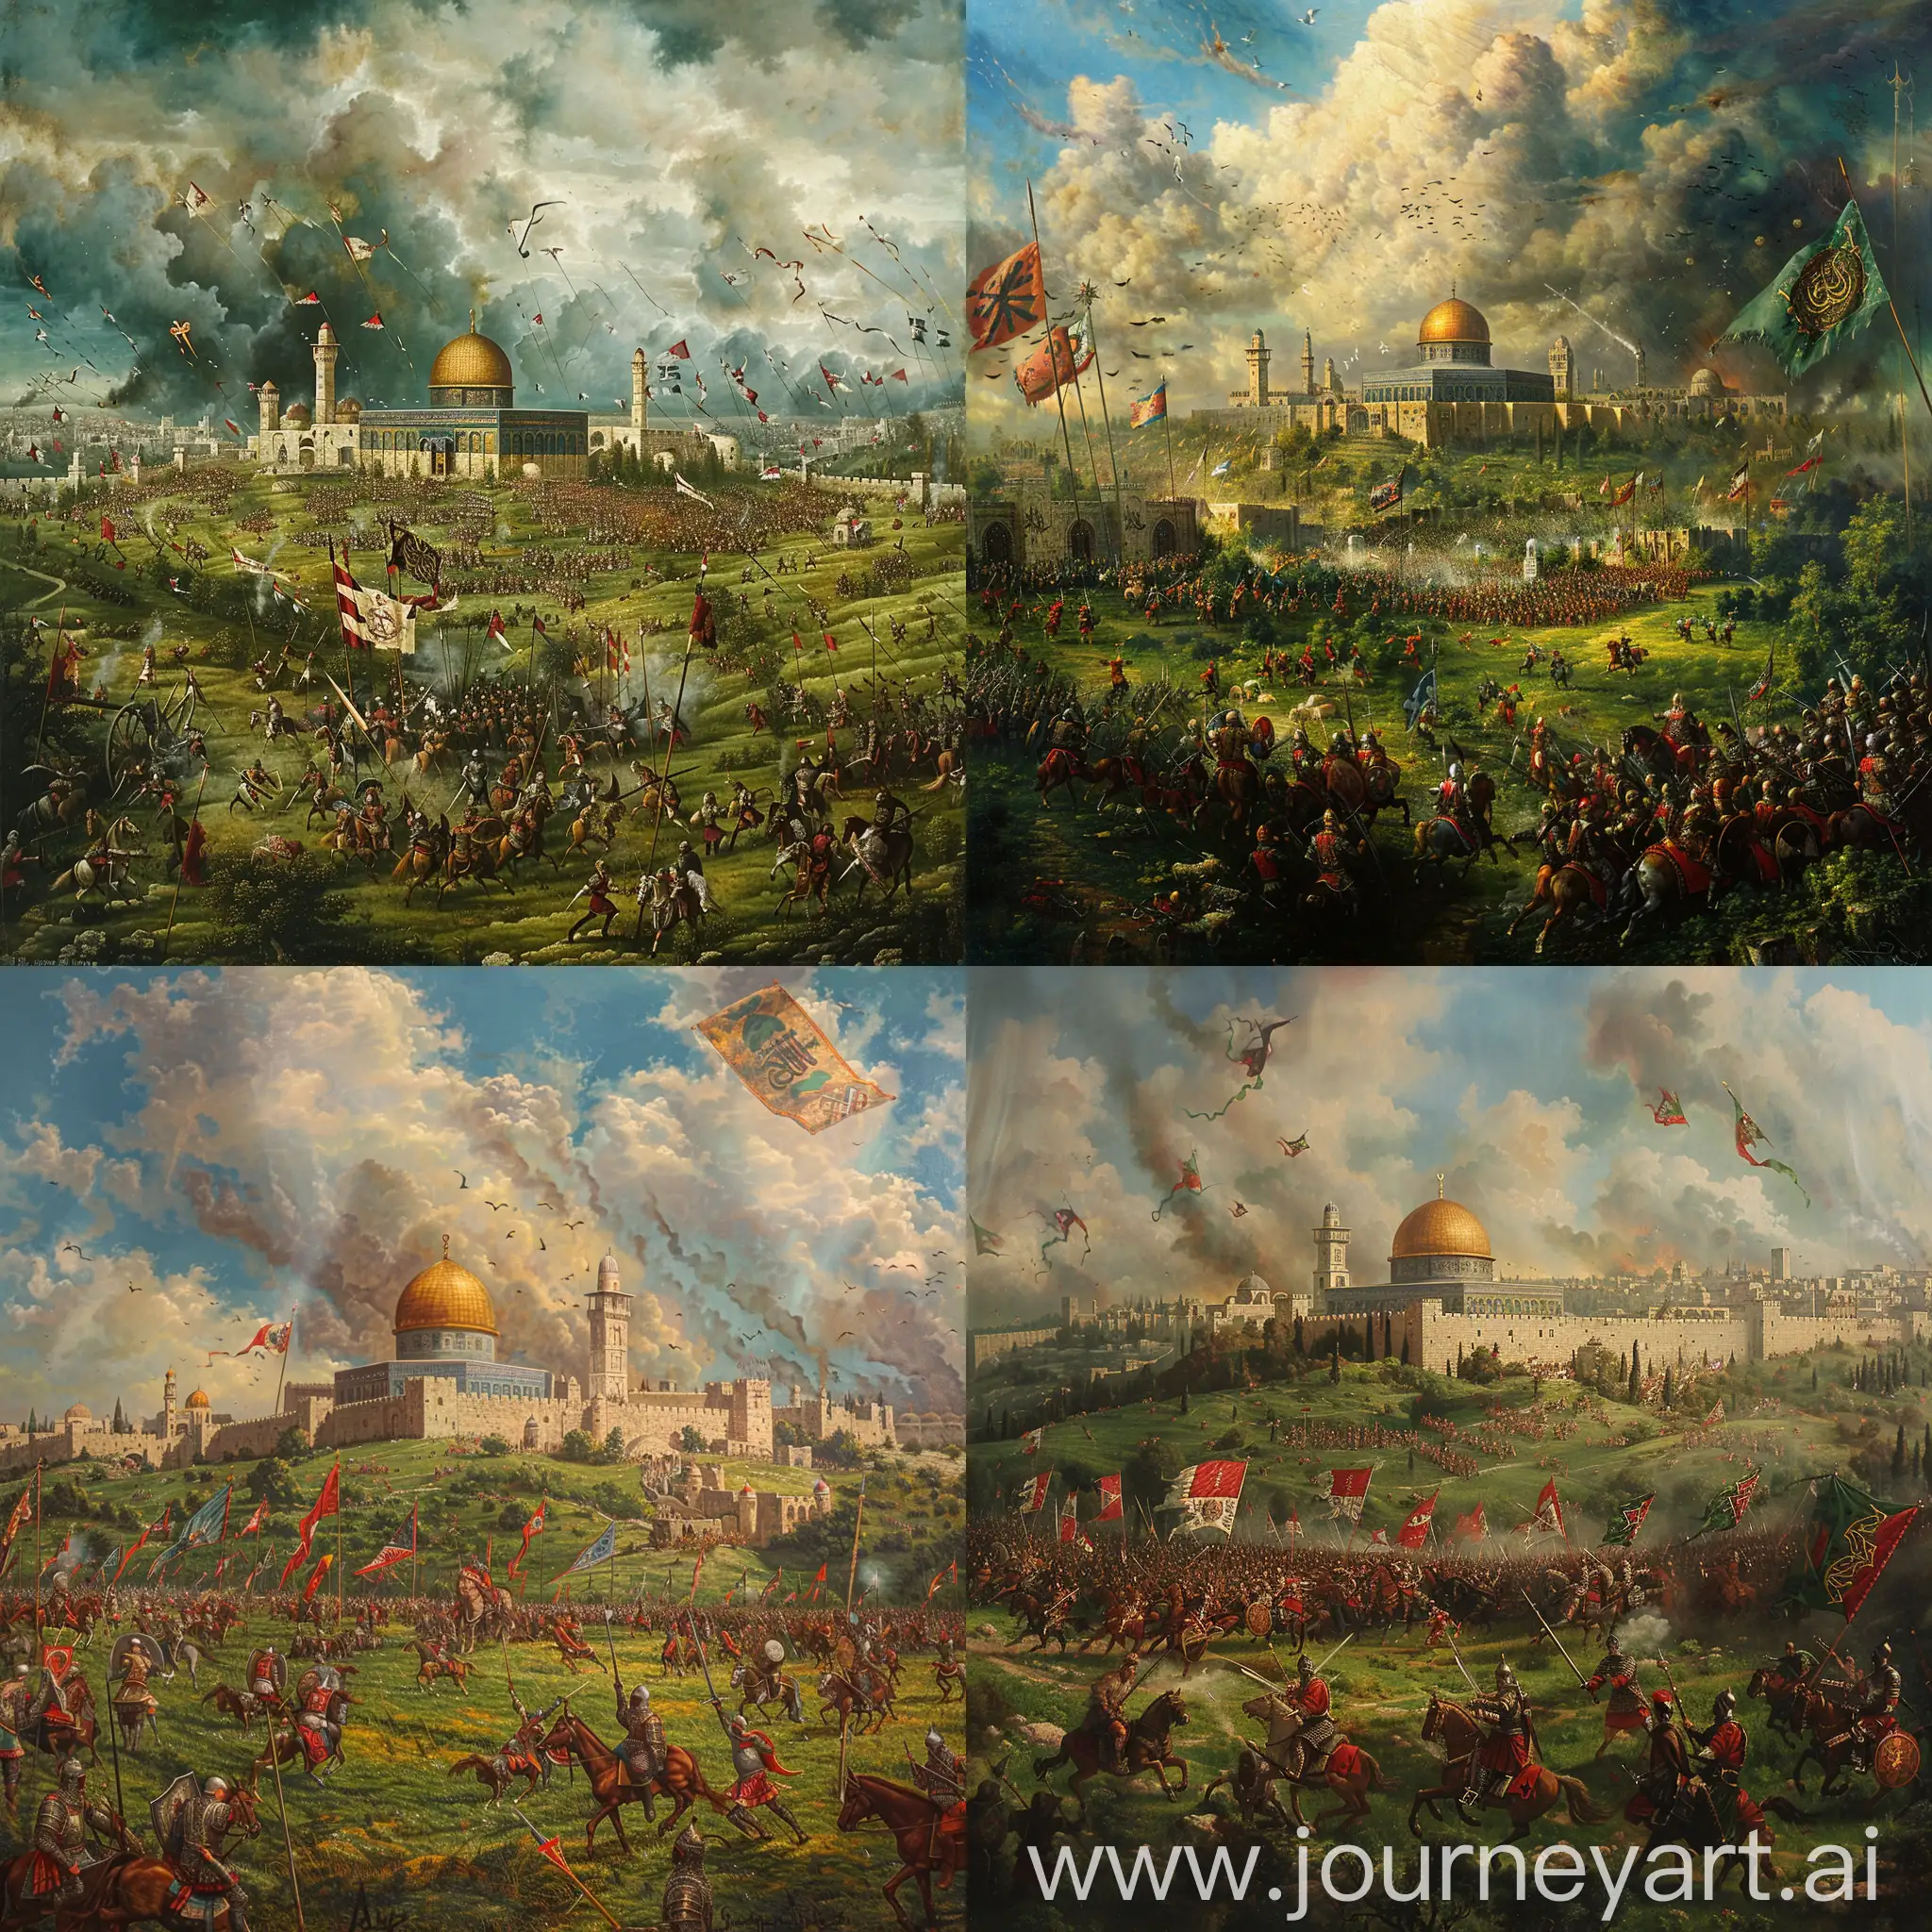 medieval Renaissance painting depicting a medieval battle scene between saracen knights and crusaders, in a lush green field, Al-aqsa mosque of Jerusalem at the center, "masjid al-aqsa", cloudy sky, flags and knight banners, heraldic aesthetic --v 6 --ar 2:3 --cref https://cdn.discordapp.com/attachments/1213041174428782623/1247881003733614628/images_-_2024-06-05T172308.069.jpg?ex=6661a33f&is=666051bf&hm=d620e36438856c91679b0027c2b15792aacc0cf617e8f43acfe529758e6c60f4& --cw 99 --sref https://cdn.discordapp.com/attachments/1209182749441654865/1247644078070566992/Raffaello_-_Spozalizio_-_Web_Gallery_of_Art.jpg?ex=66616f58&is=66601dd8&hm=476953bed1d1d14ea4d4401426997a6b5832802a906a7439c121236ef68b581e& --sw 999 --q 1